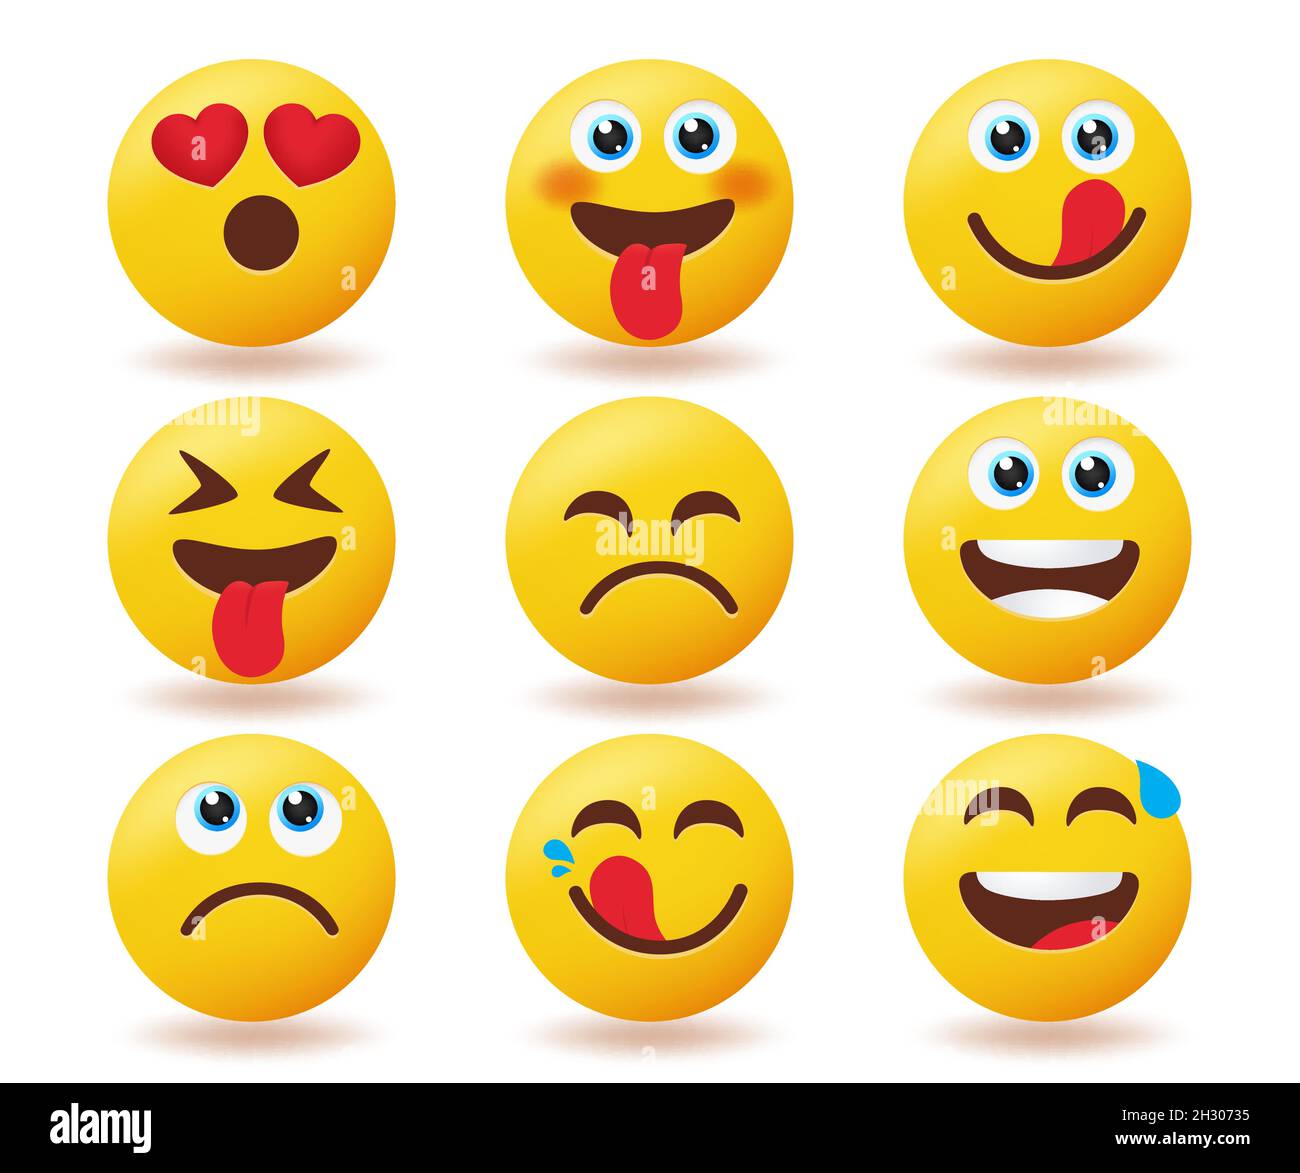 Smileys emoticon vector set. Emojis smiley icon in happy, funny and yummy face expressions isolated in white background for emoji yellow faces. Stock Vector